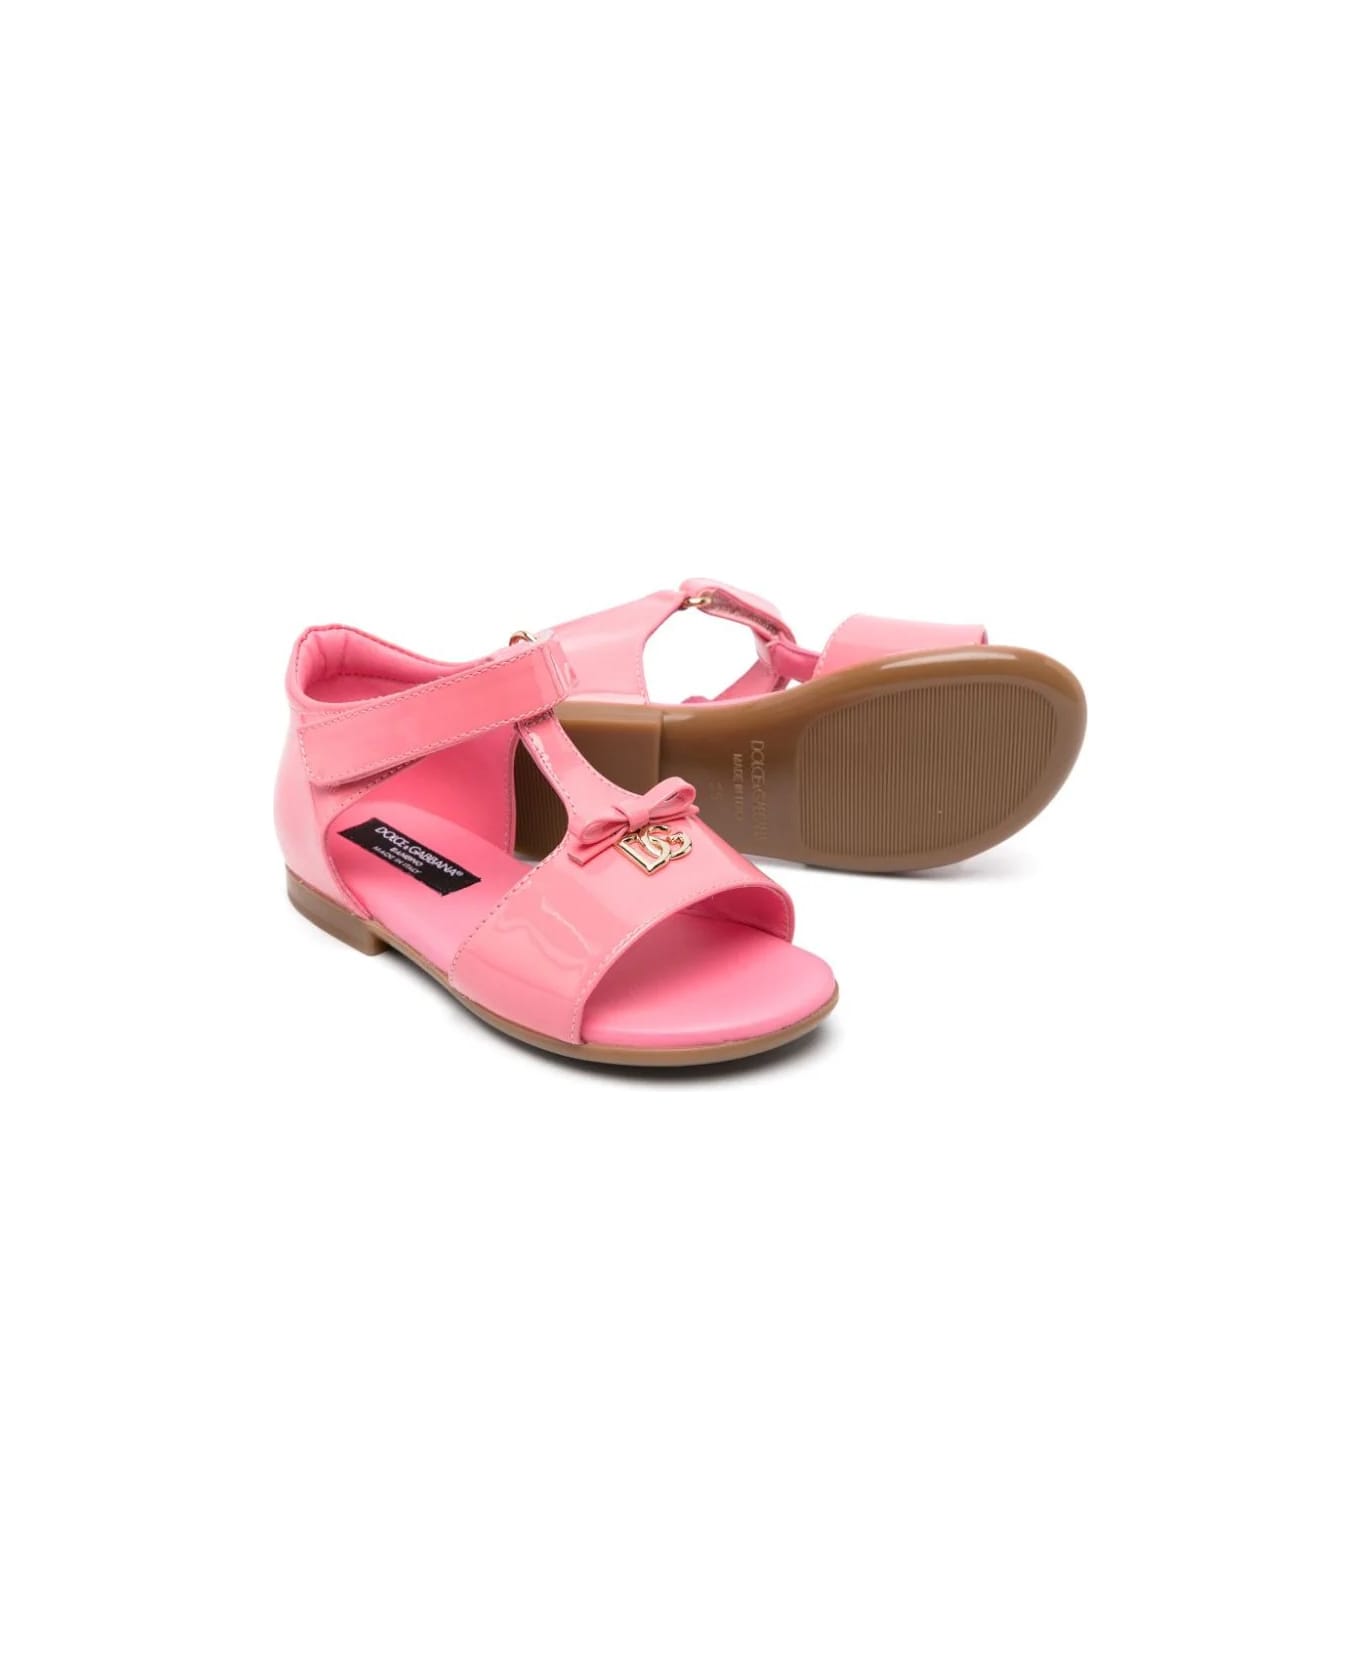 Dolce & Gabbana Blush Pink Patent Leather Sandals With Dg Logo - Pink